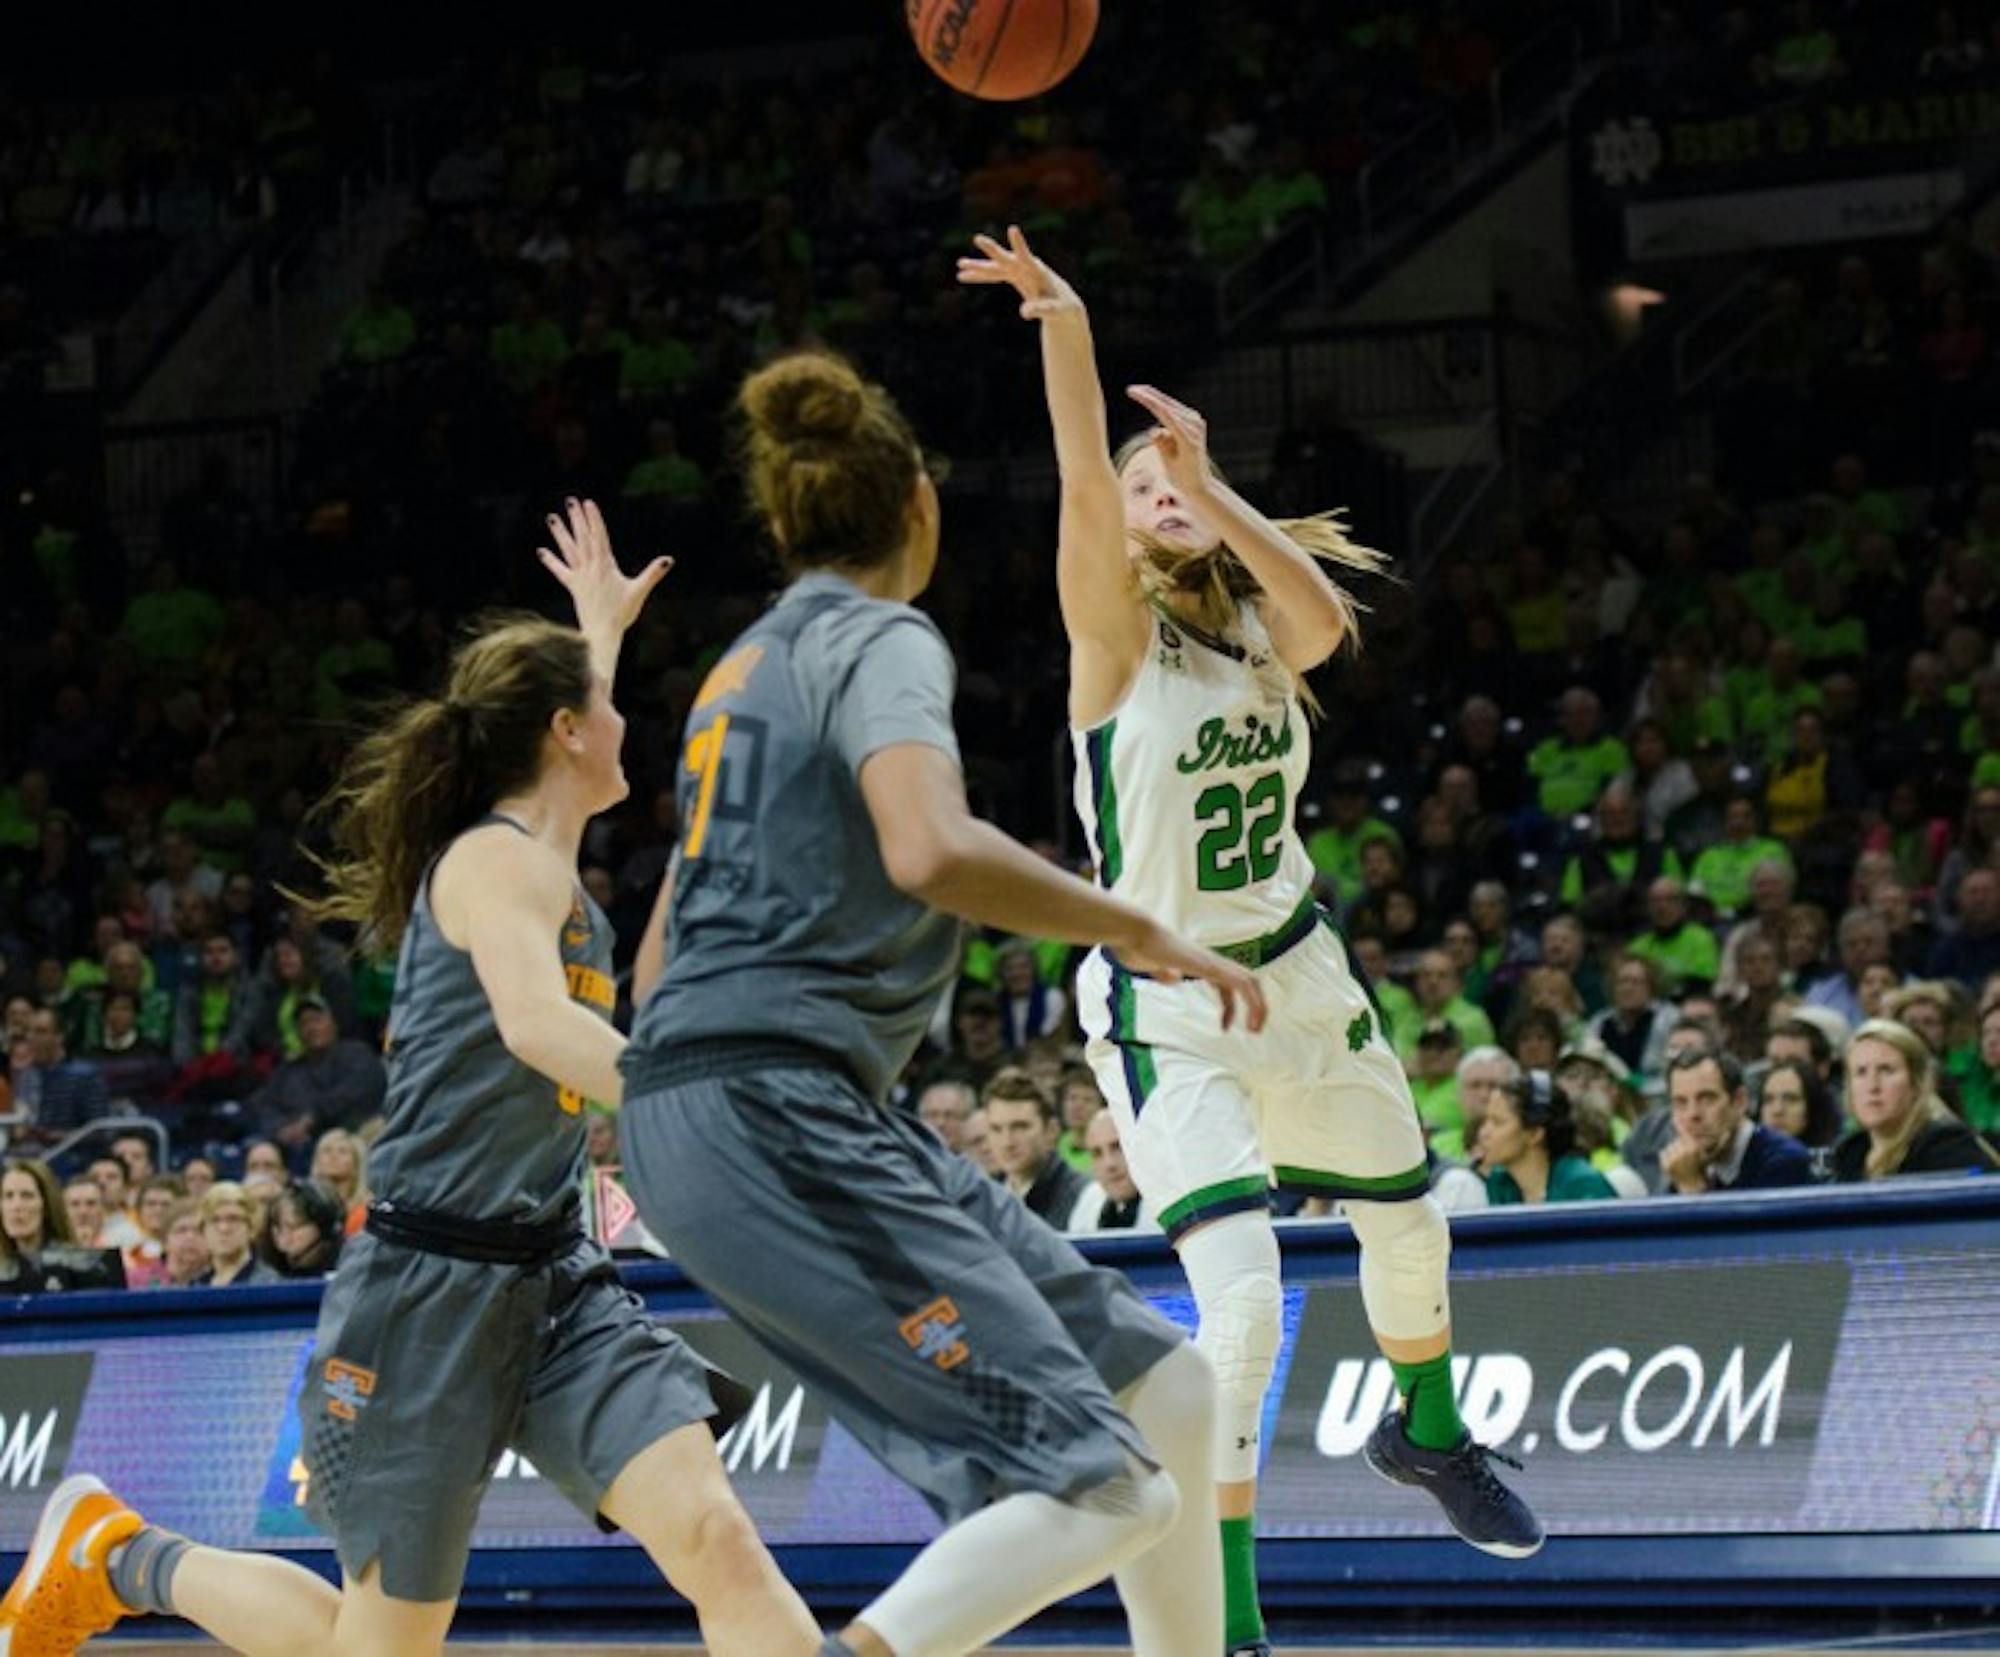 Graduate student guard Madison Cable shoots during a 79-66 victory over Tennessee on Jan. 18 at Purcell Pavilion.